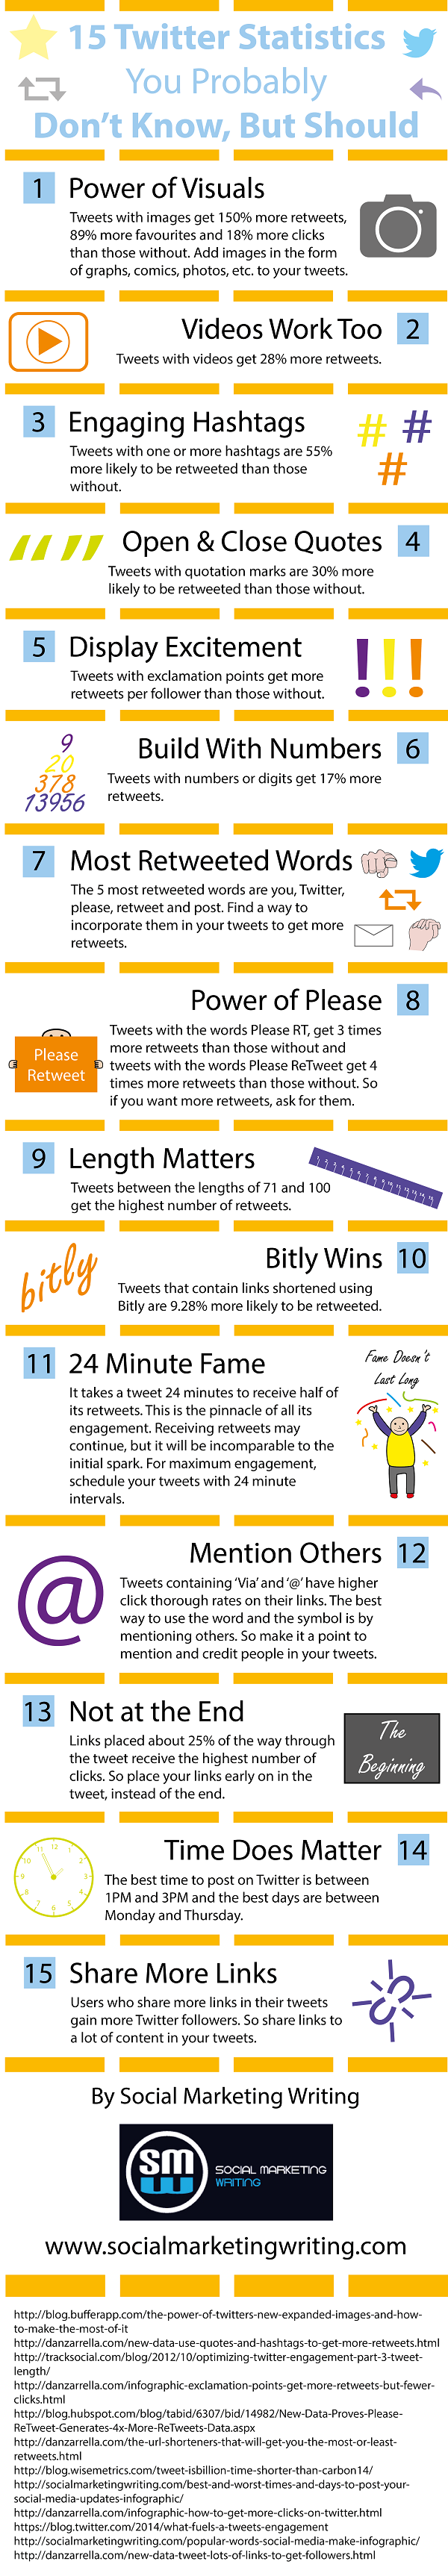 15-Twitter-Statistics-You-Probably-Don’t-Know-But-Should-Infographic